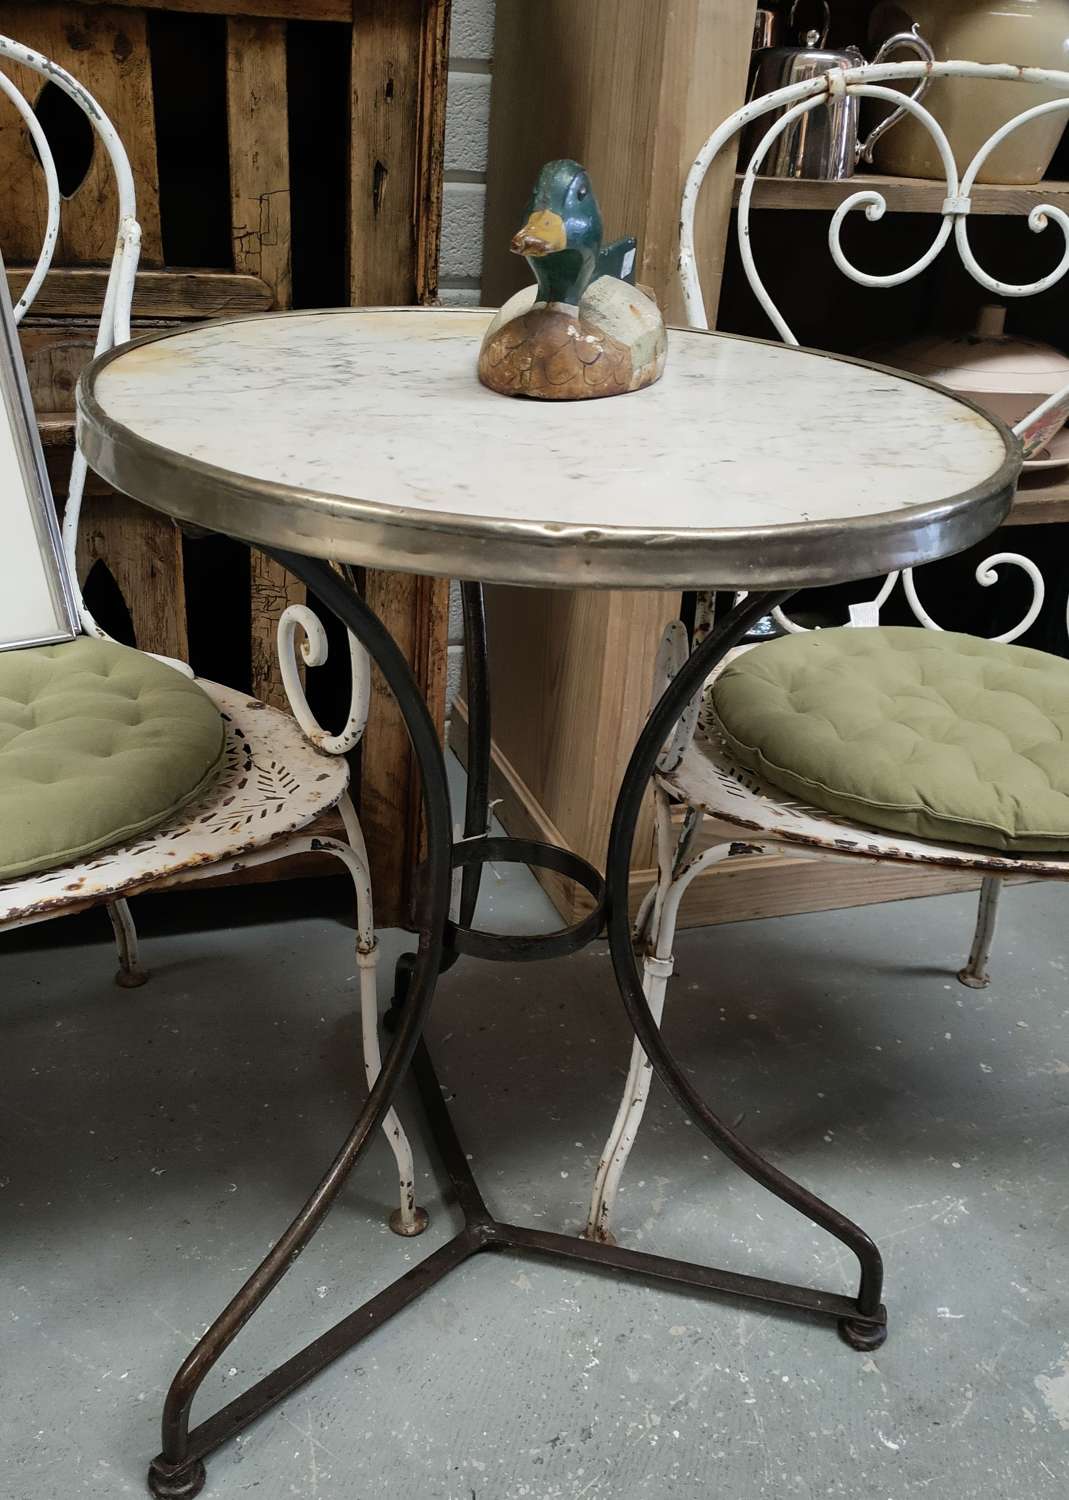 Early 20th century French garden table